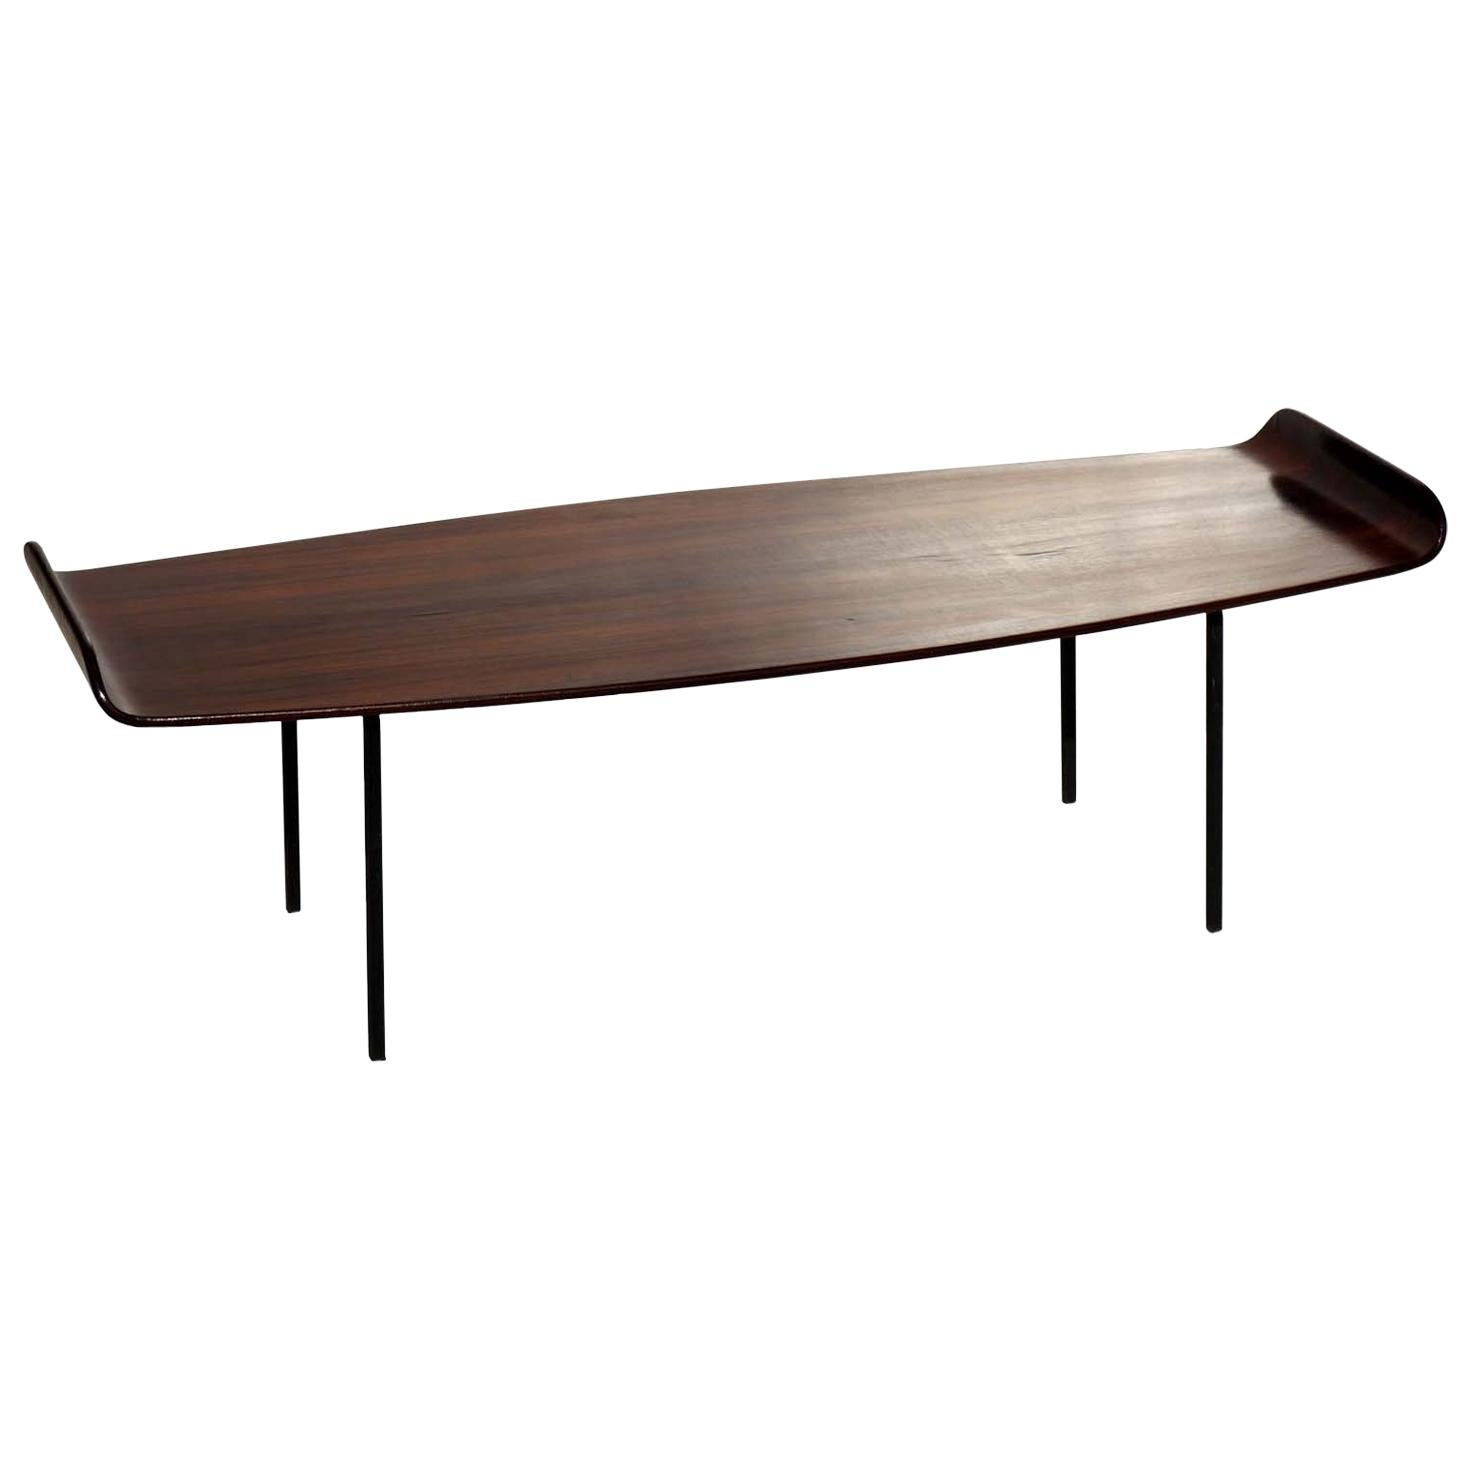 "Pilade" by Campo & Graffi for Home Italian Design 1950s Midcentury Coffee Table